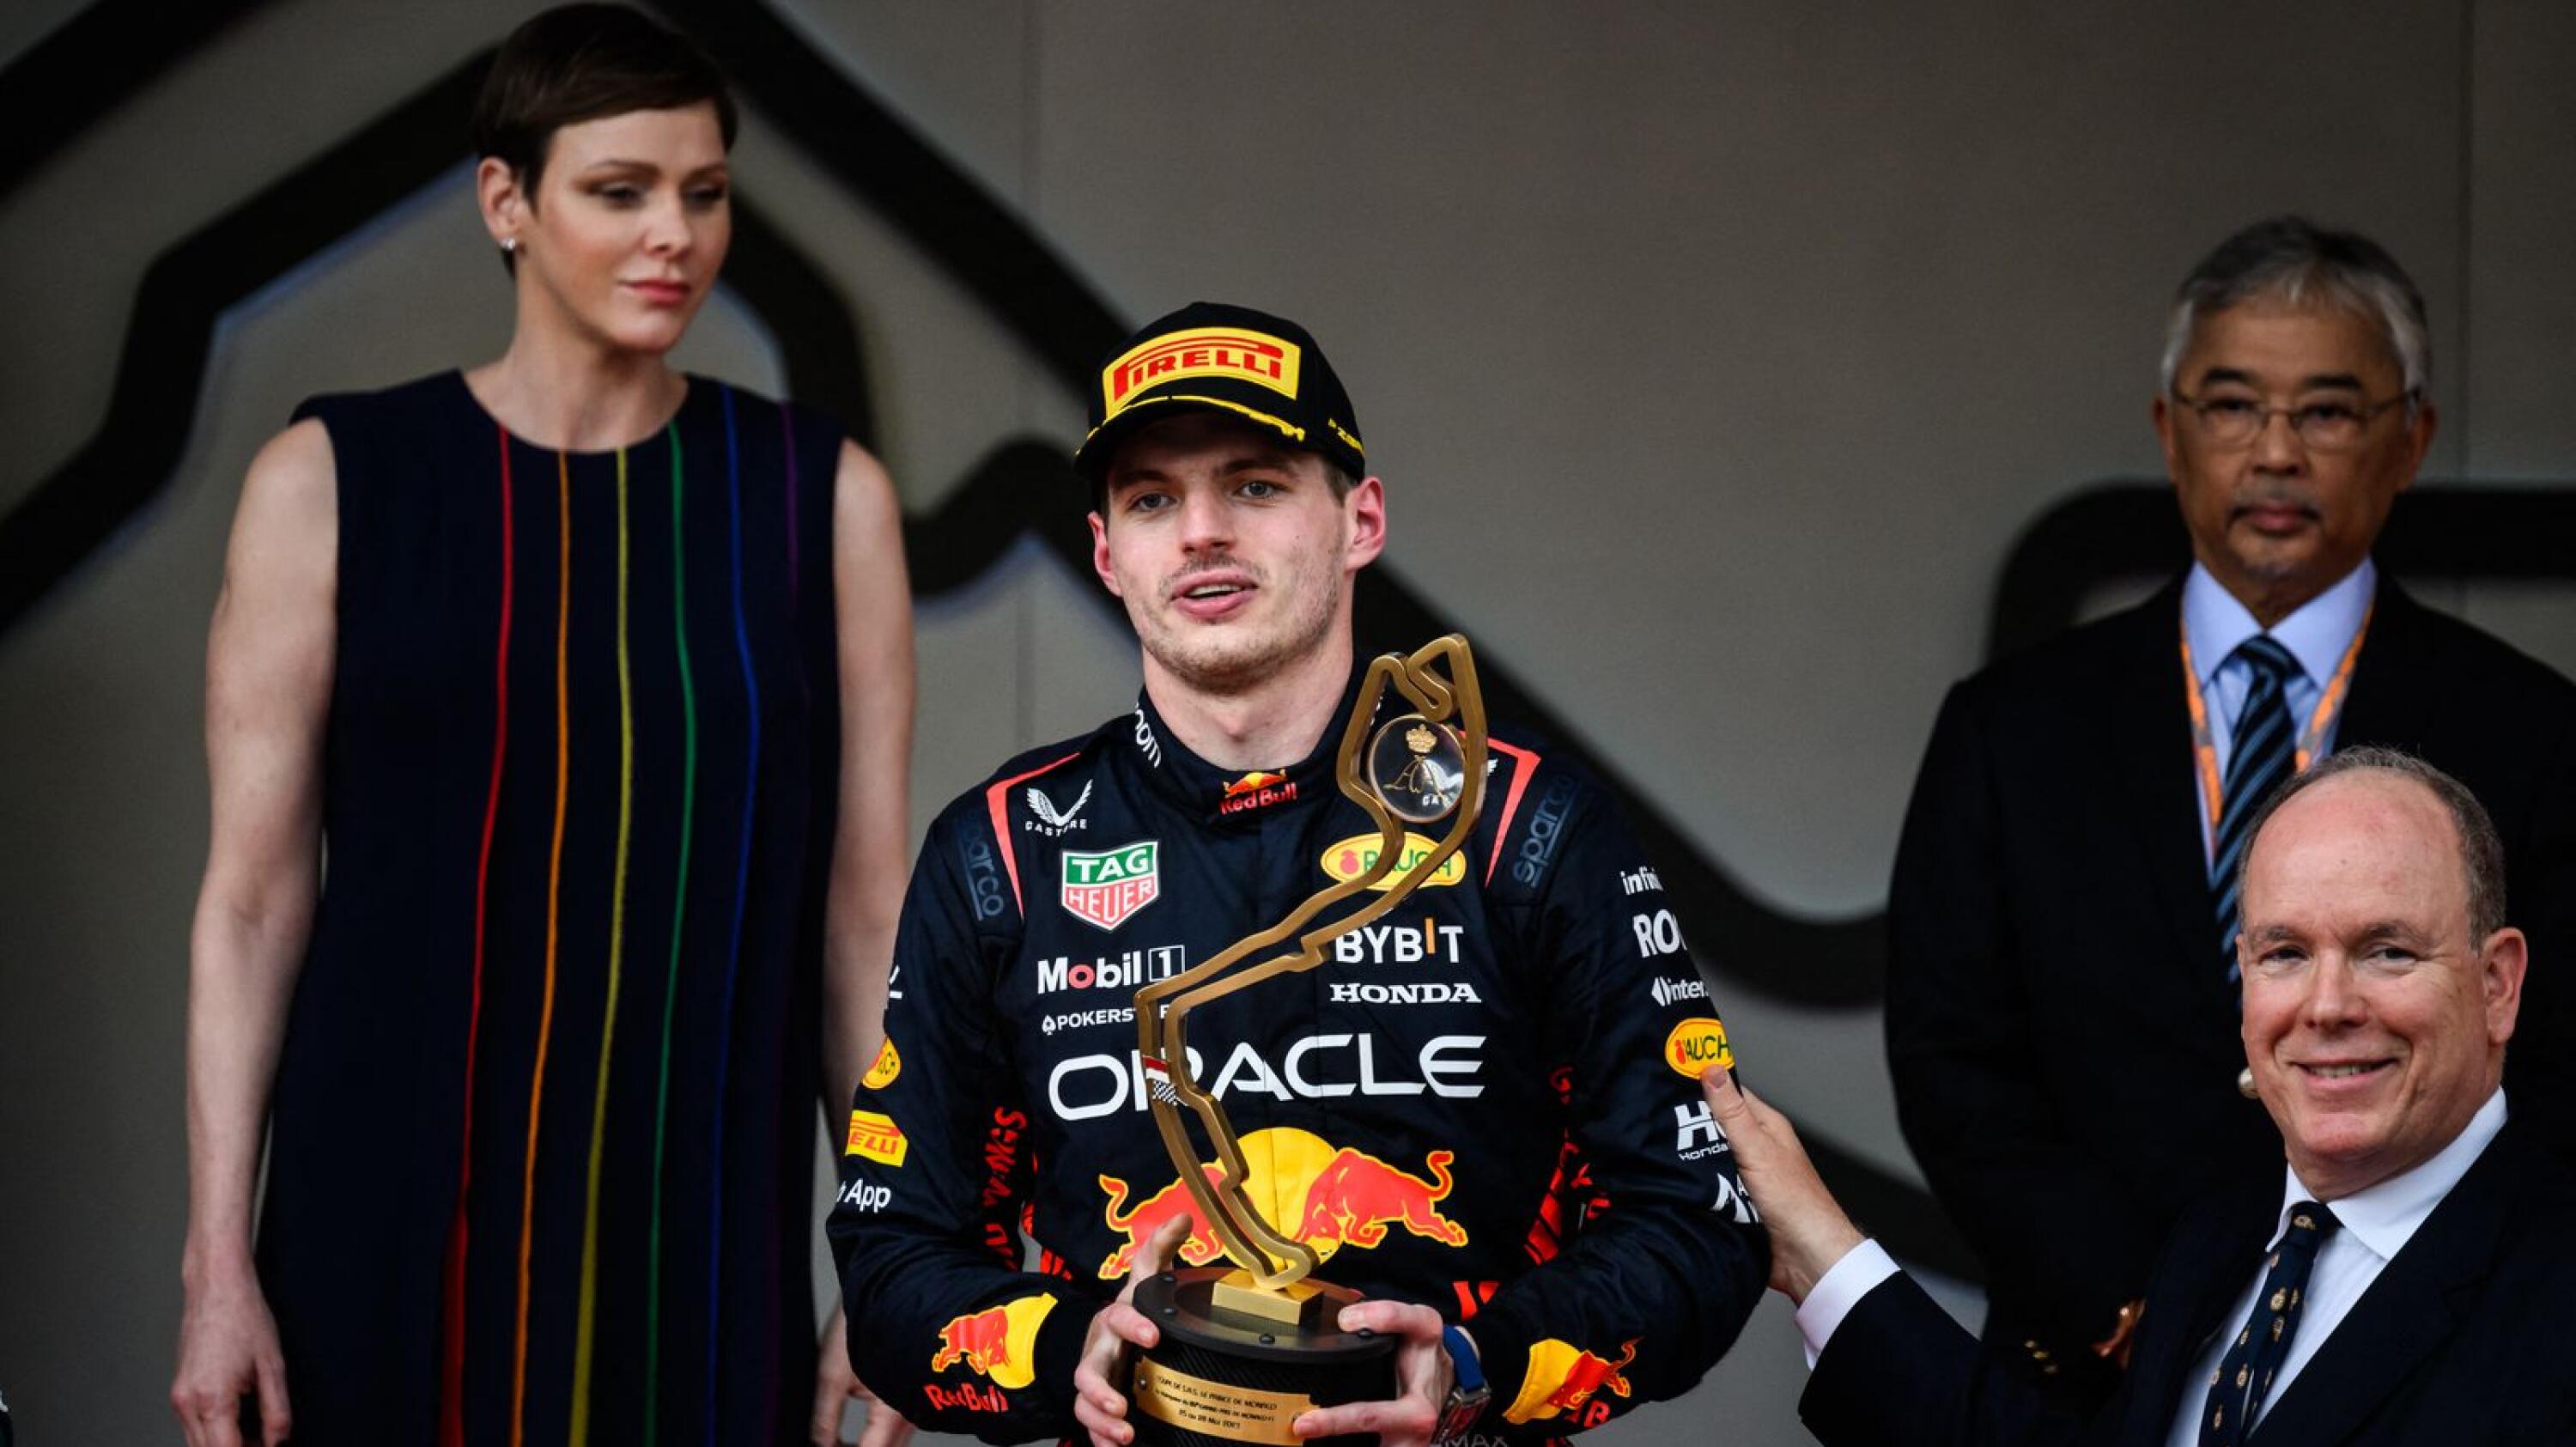 Max Verstappen holds up his trophy flanked by Prince Albert II and Princess Charlene of Monaco on the podium after winning the Monaco Grand Prix on Sunday.